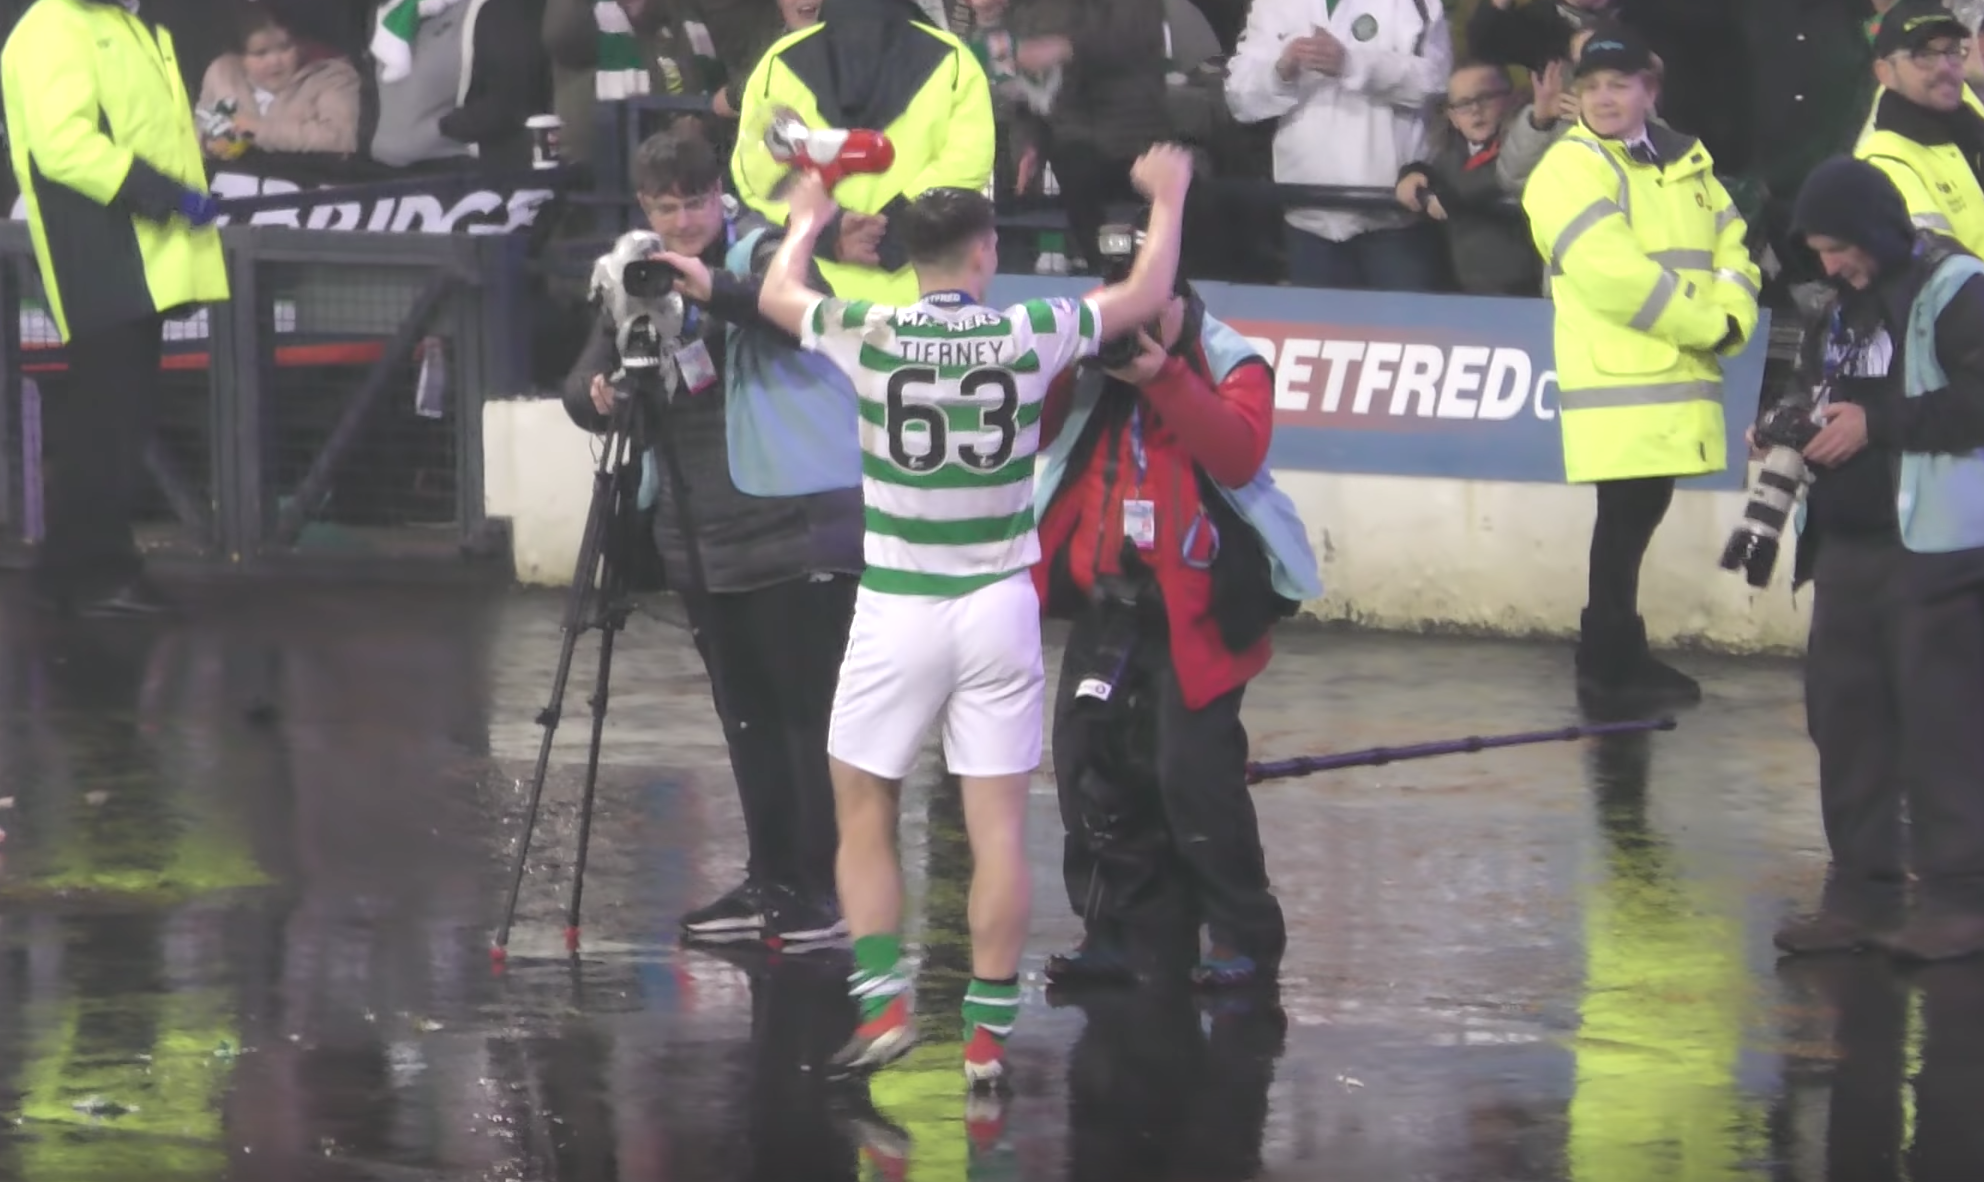 (Image) Proof that Kieran Tierney really joined the live stream when Rangers went 2-0 down v Aberdeen